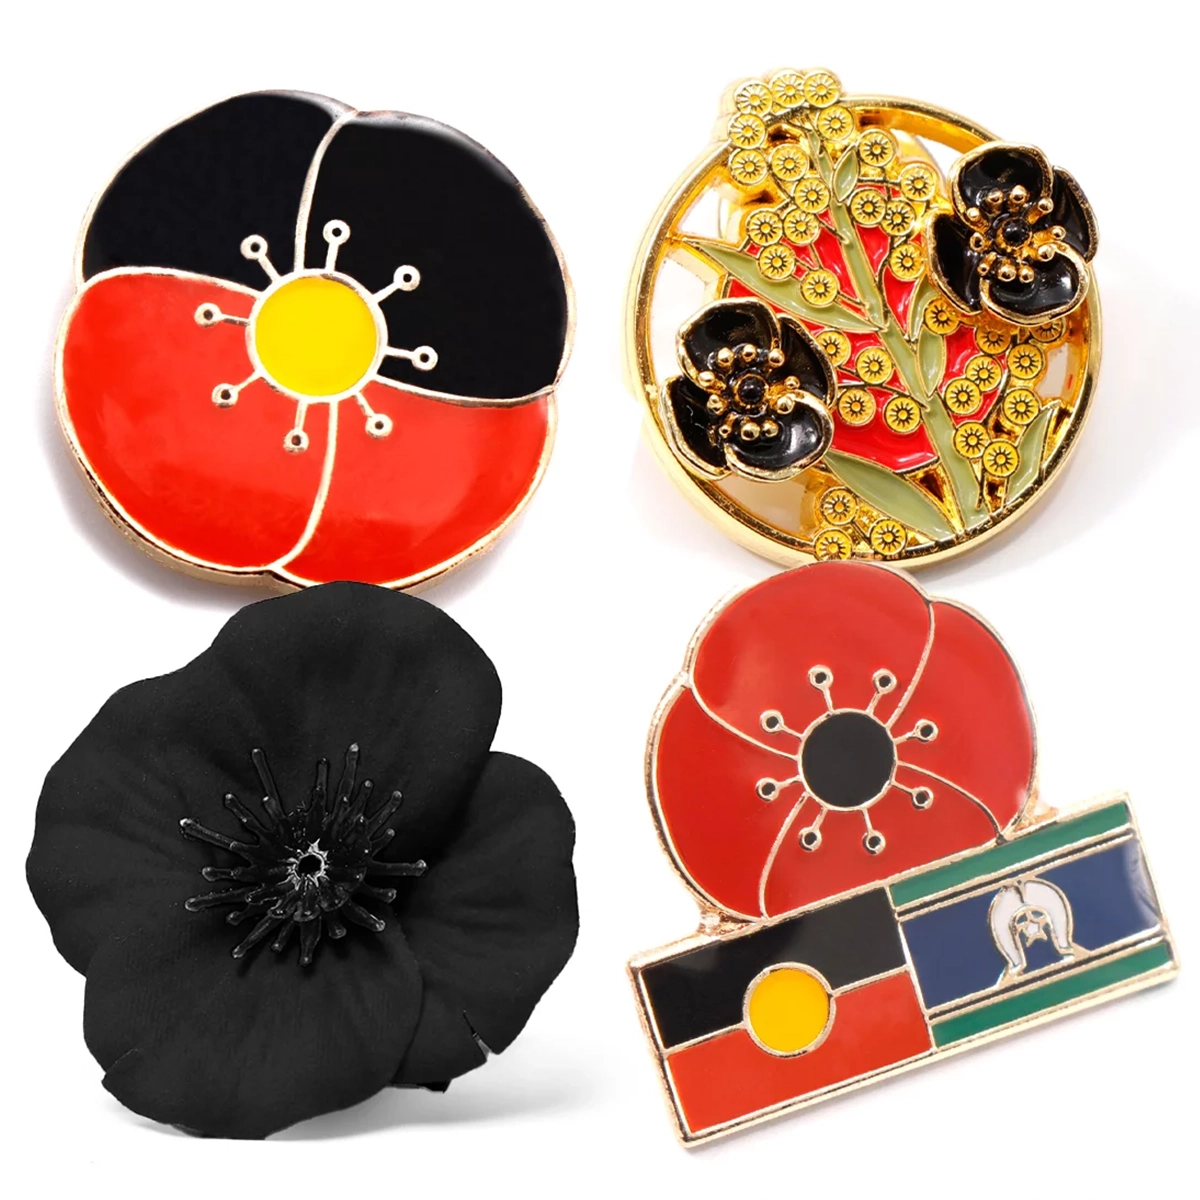 Indigenous Service Collection featuring Indigenous Service lapel Pins and badges available on Military Shop Remembrance Day webpage